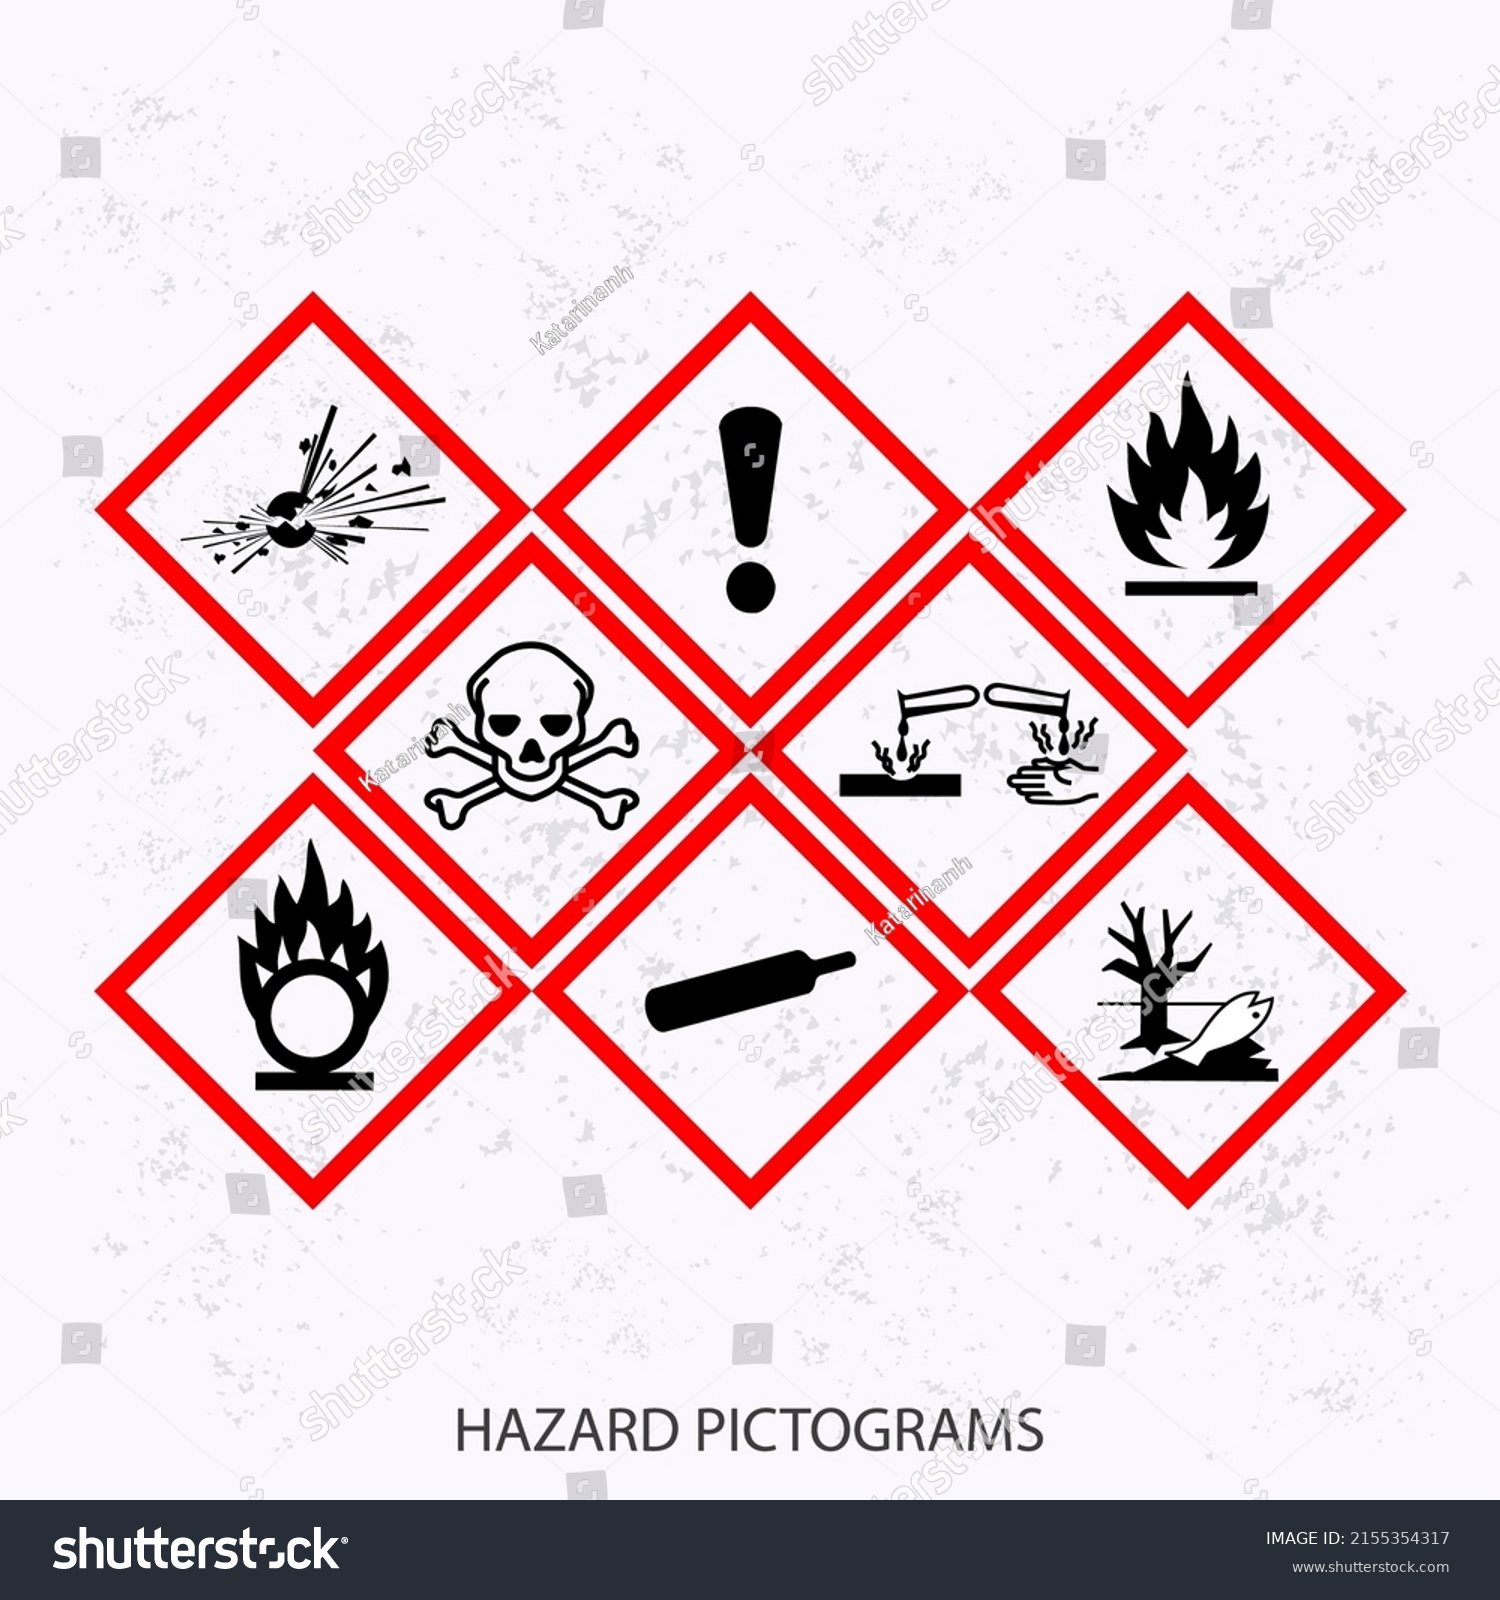 Set Hazards Pictograms On Vector Grunge Stock Vector (Royalty Free ...